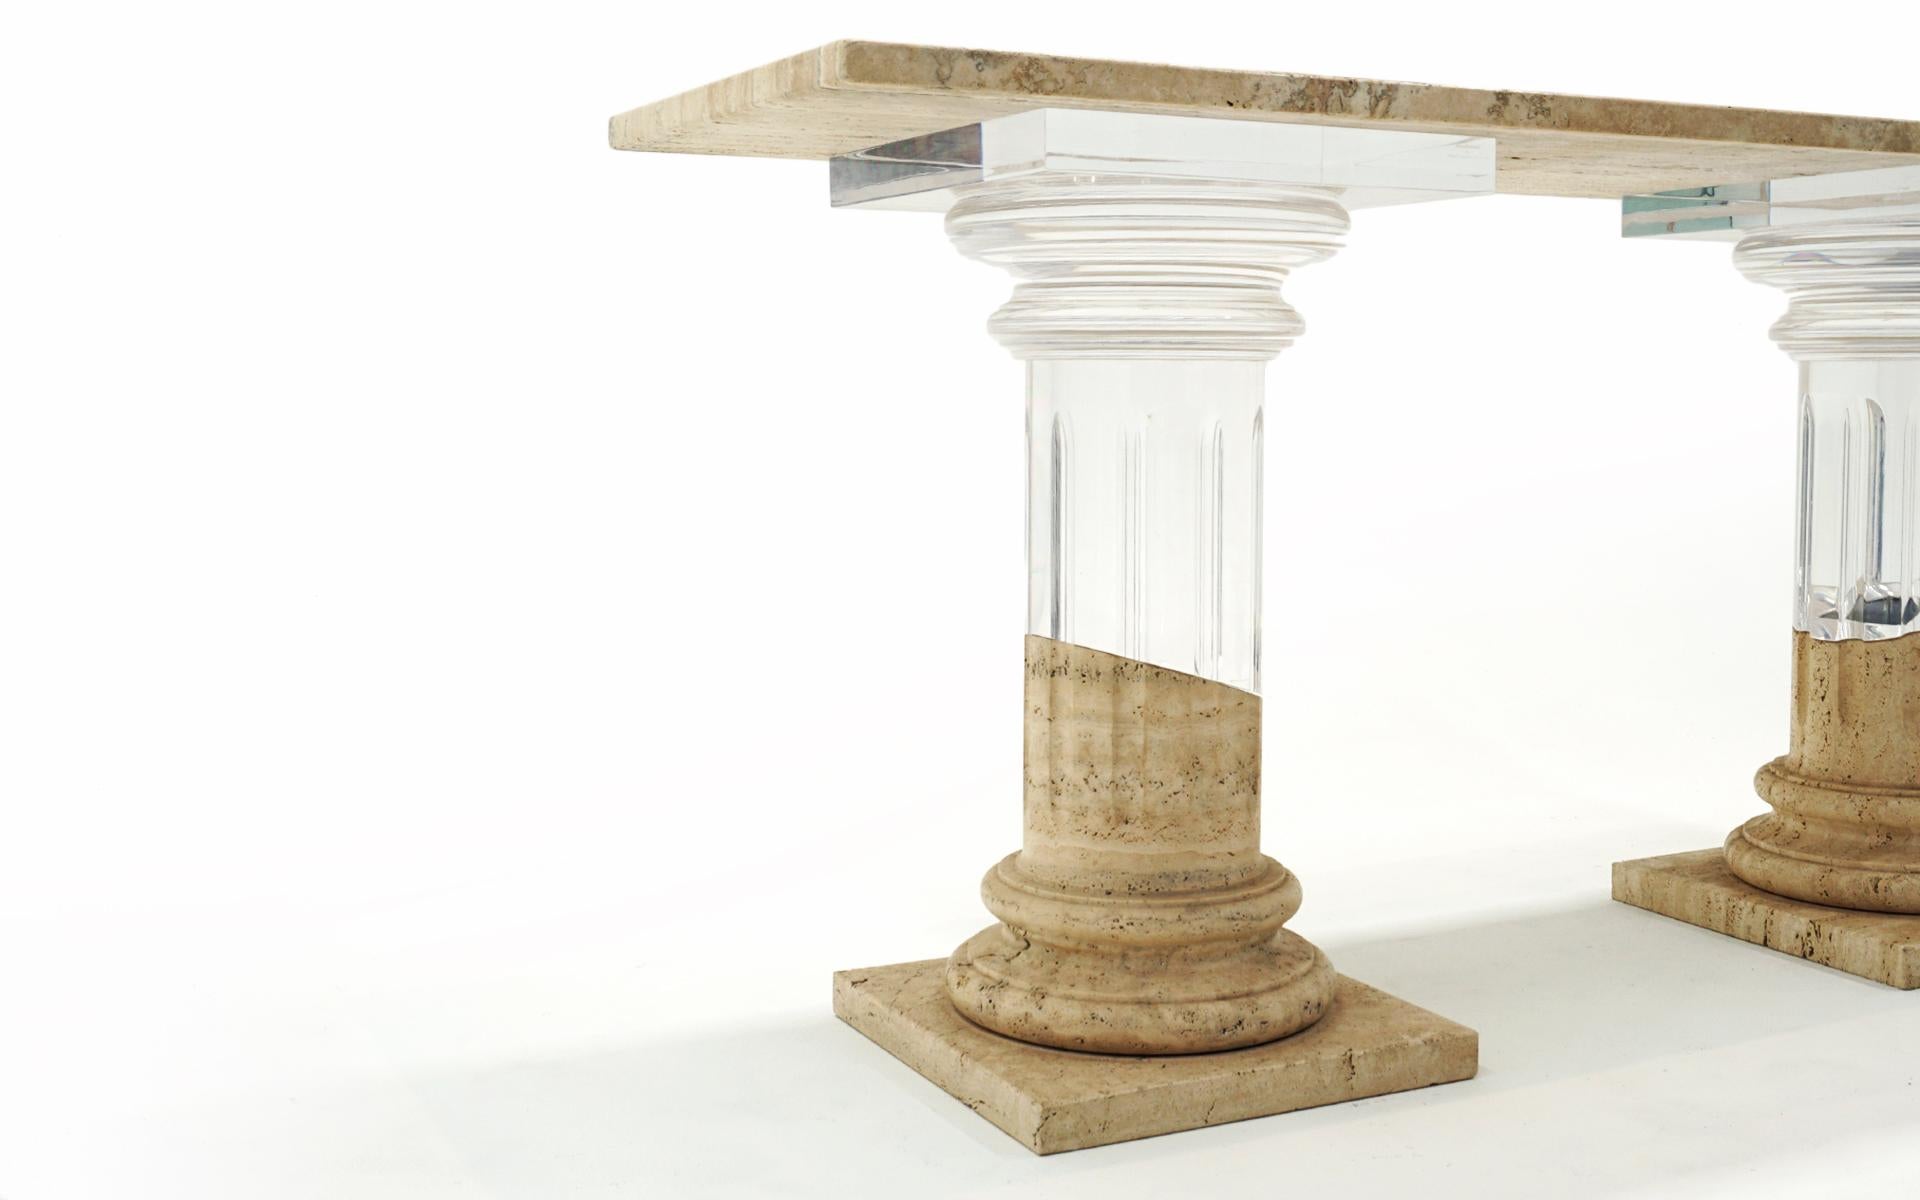 Sofa / Console Table in Travertine and Acrylic by Fabian Decoration, Rome, Italy For Sale 1